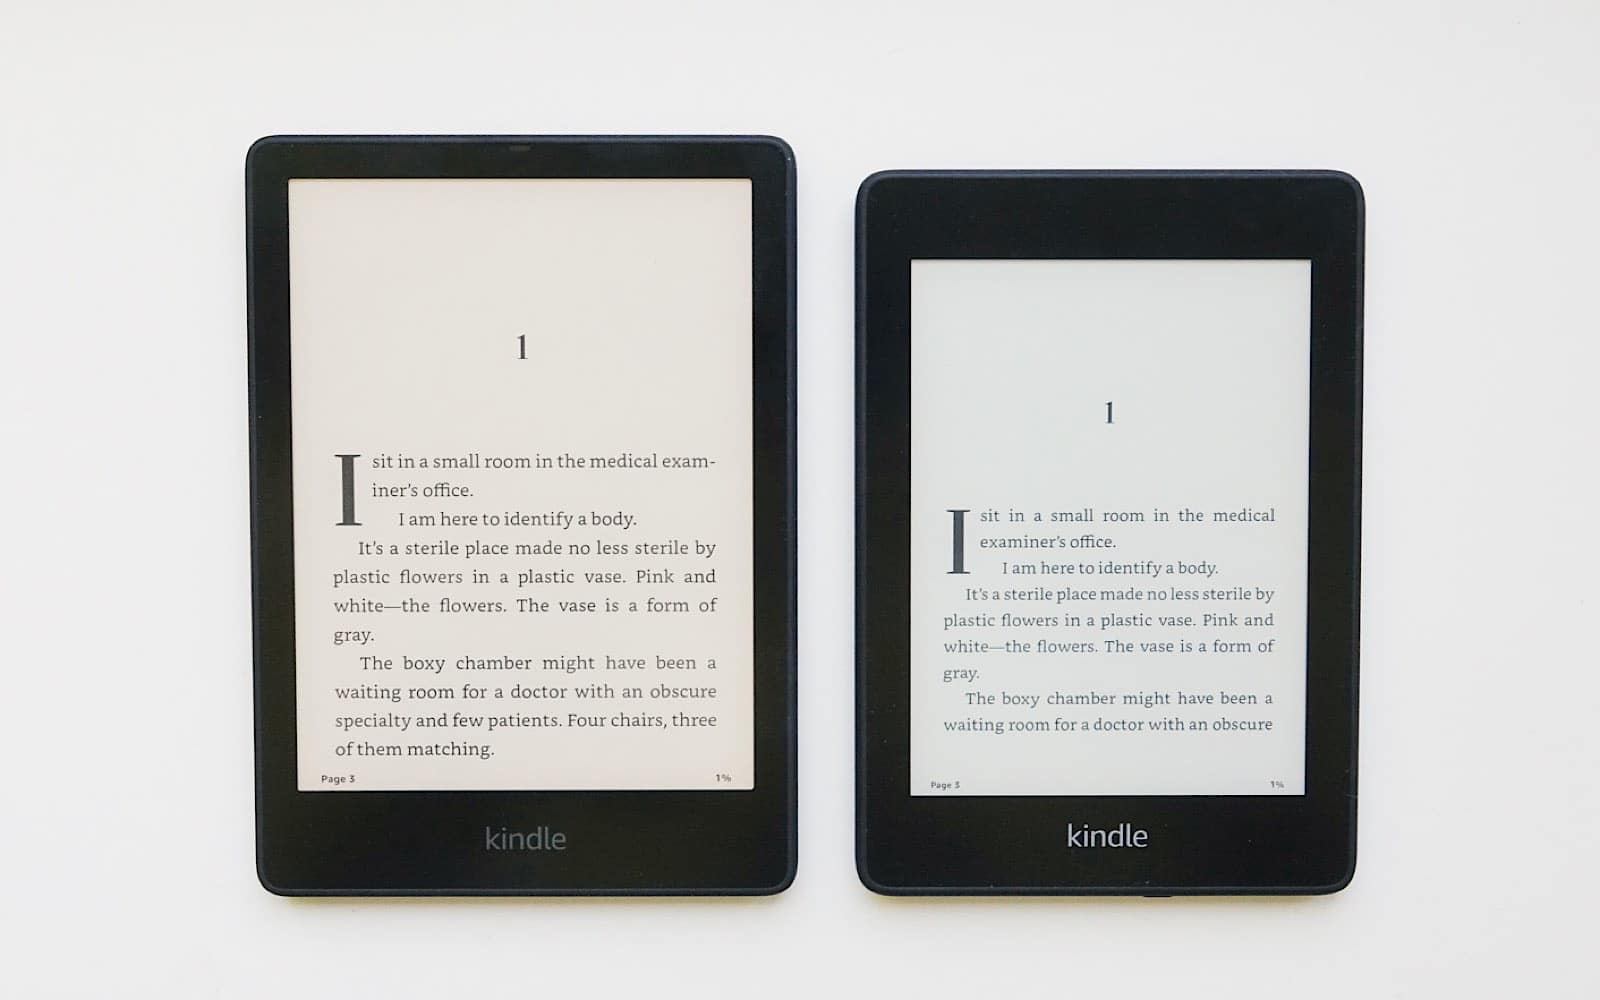 6.8 inch Paperwhite Signature Edition (left) versus the previous 6 inch Paperwhite before it (right)